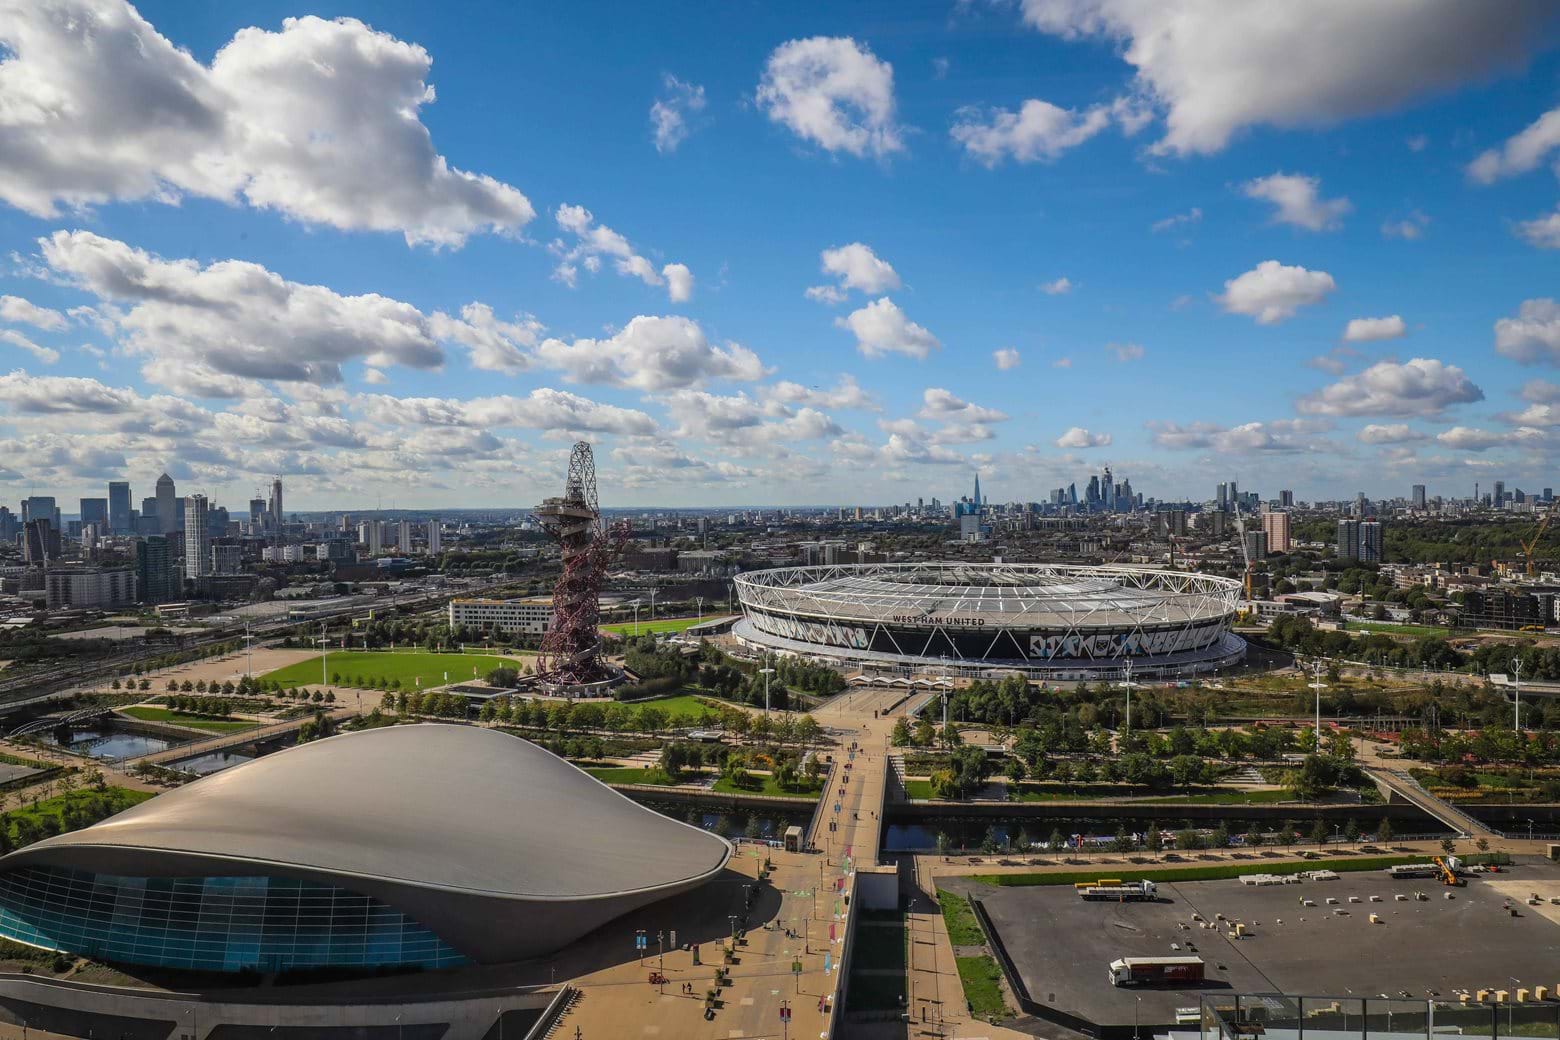 Olympic Park | Greenway - Local area photography